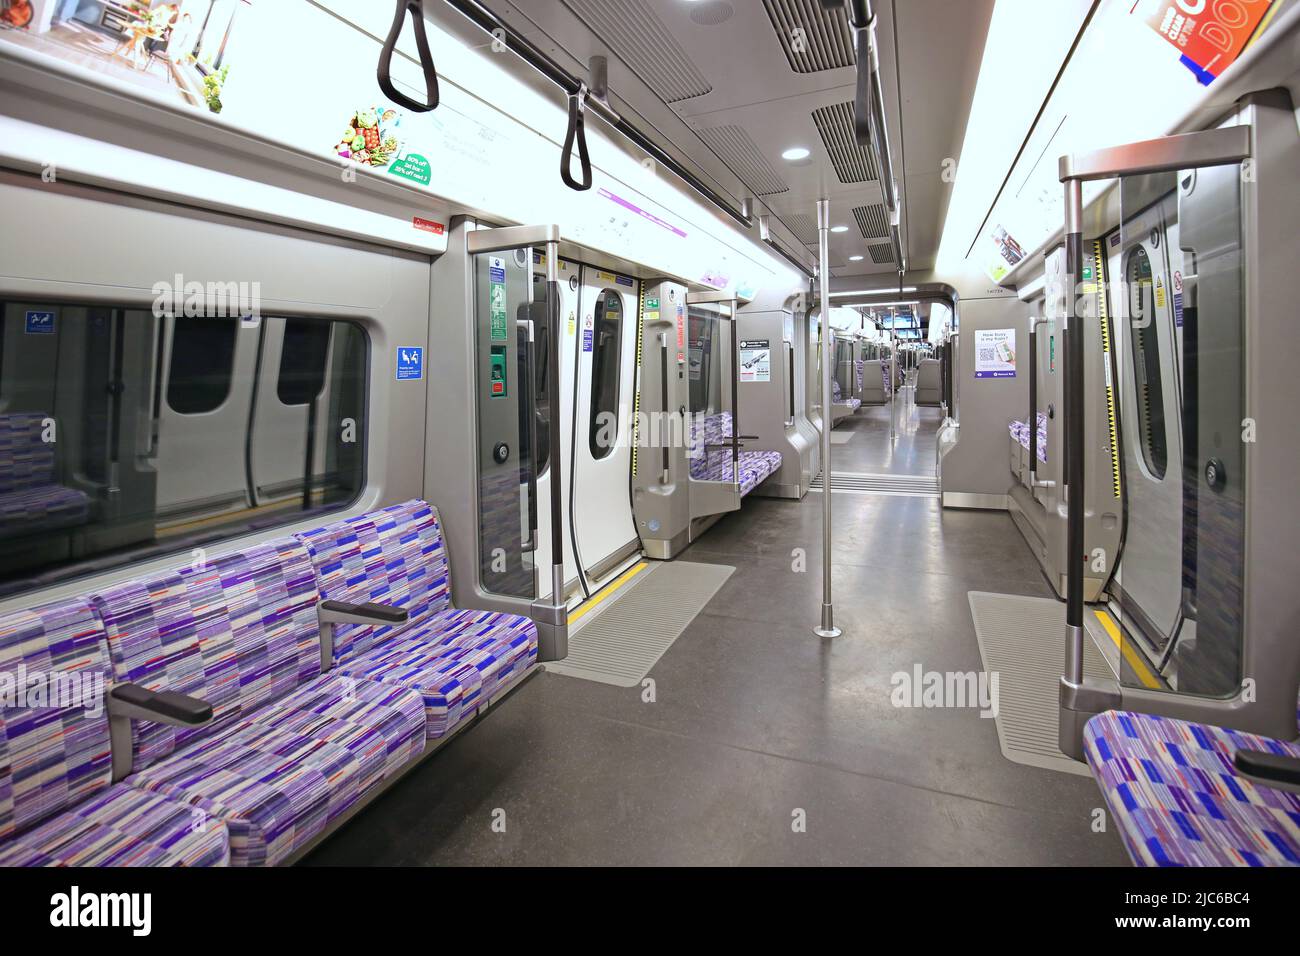 Interior of a train carriage on London's new Elizabeth Line (Crossrail) as it runs underground across the city. No passengers visible. Stock Photo